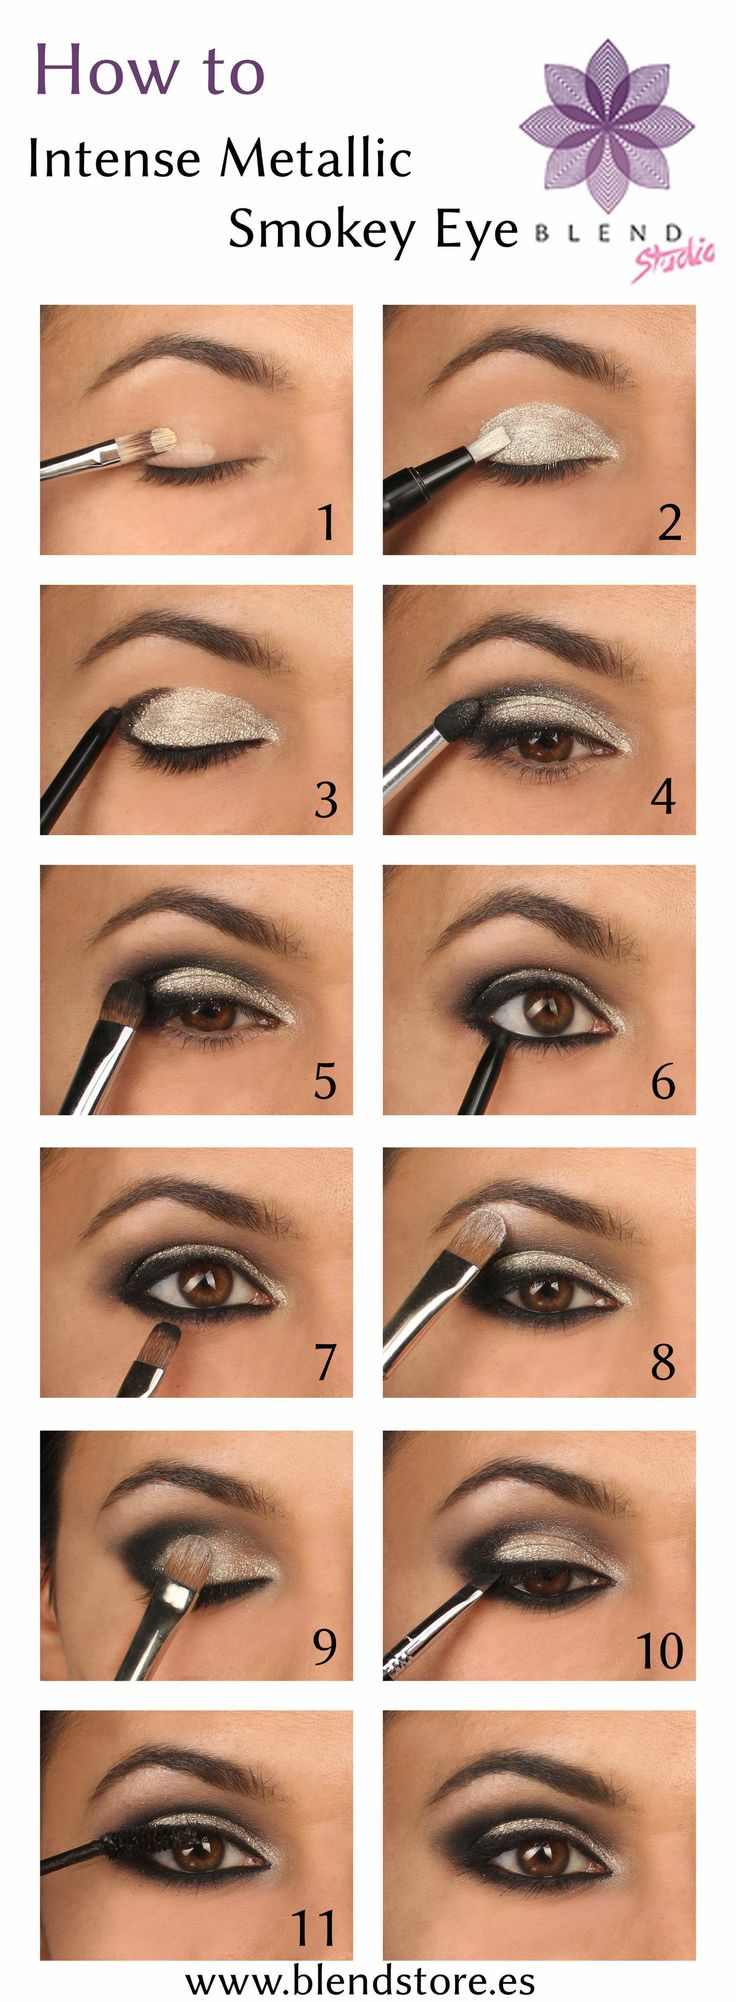 Step By Step Smokey Eye Makeup For Blue Eyes 15 Smokey Eye Tutorials Step Step Guide To Perfect Hollywood Makeup